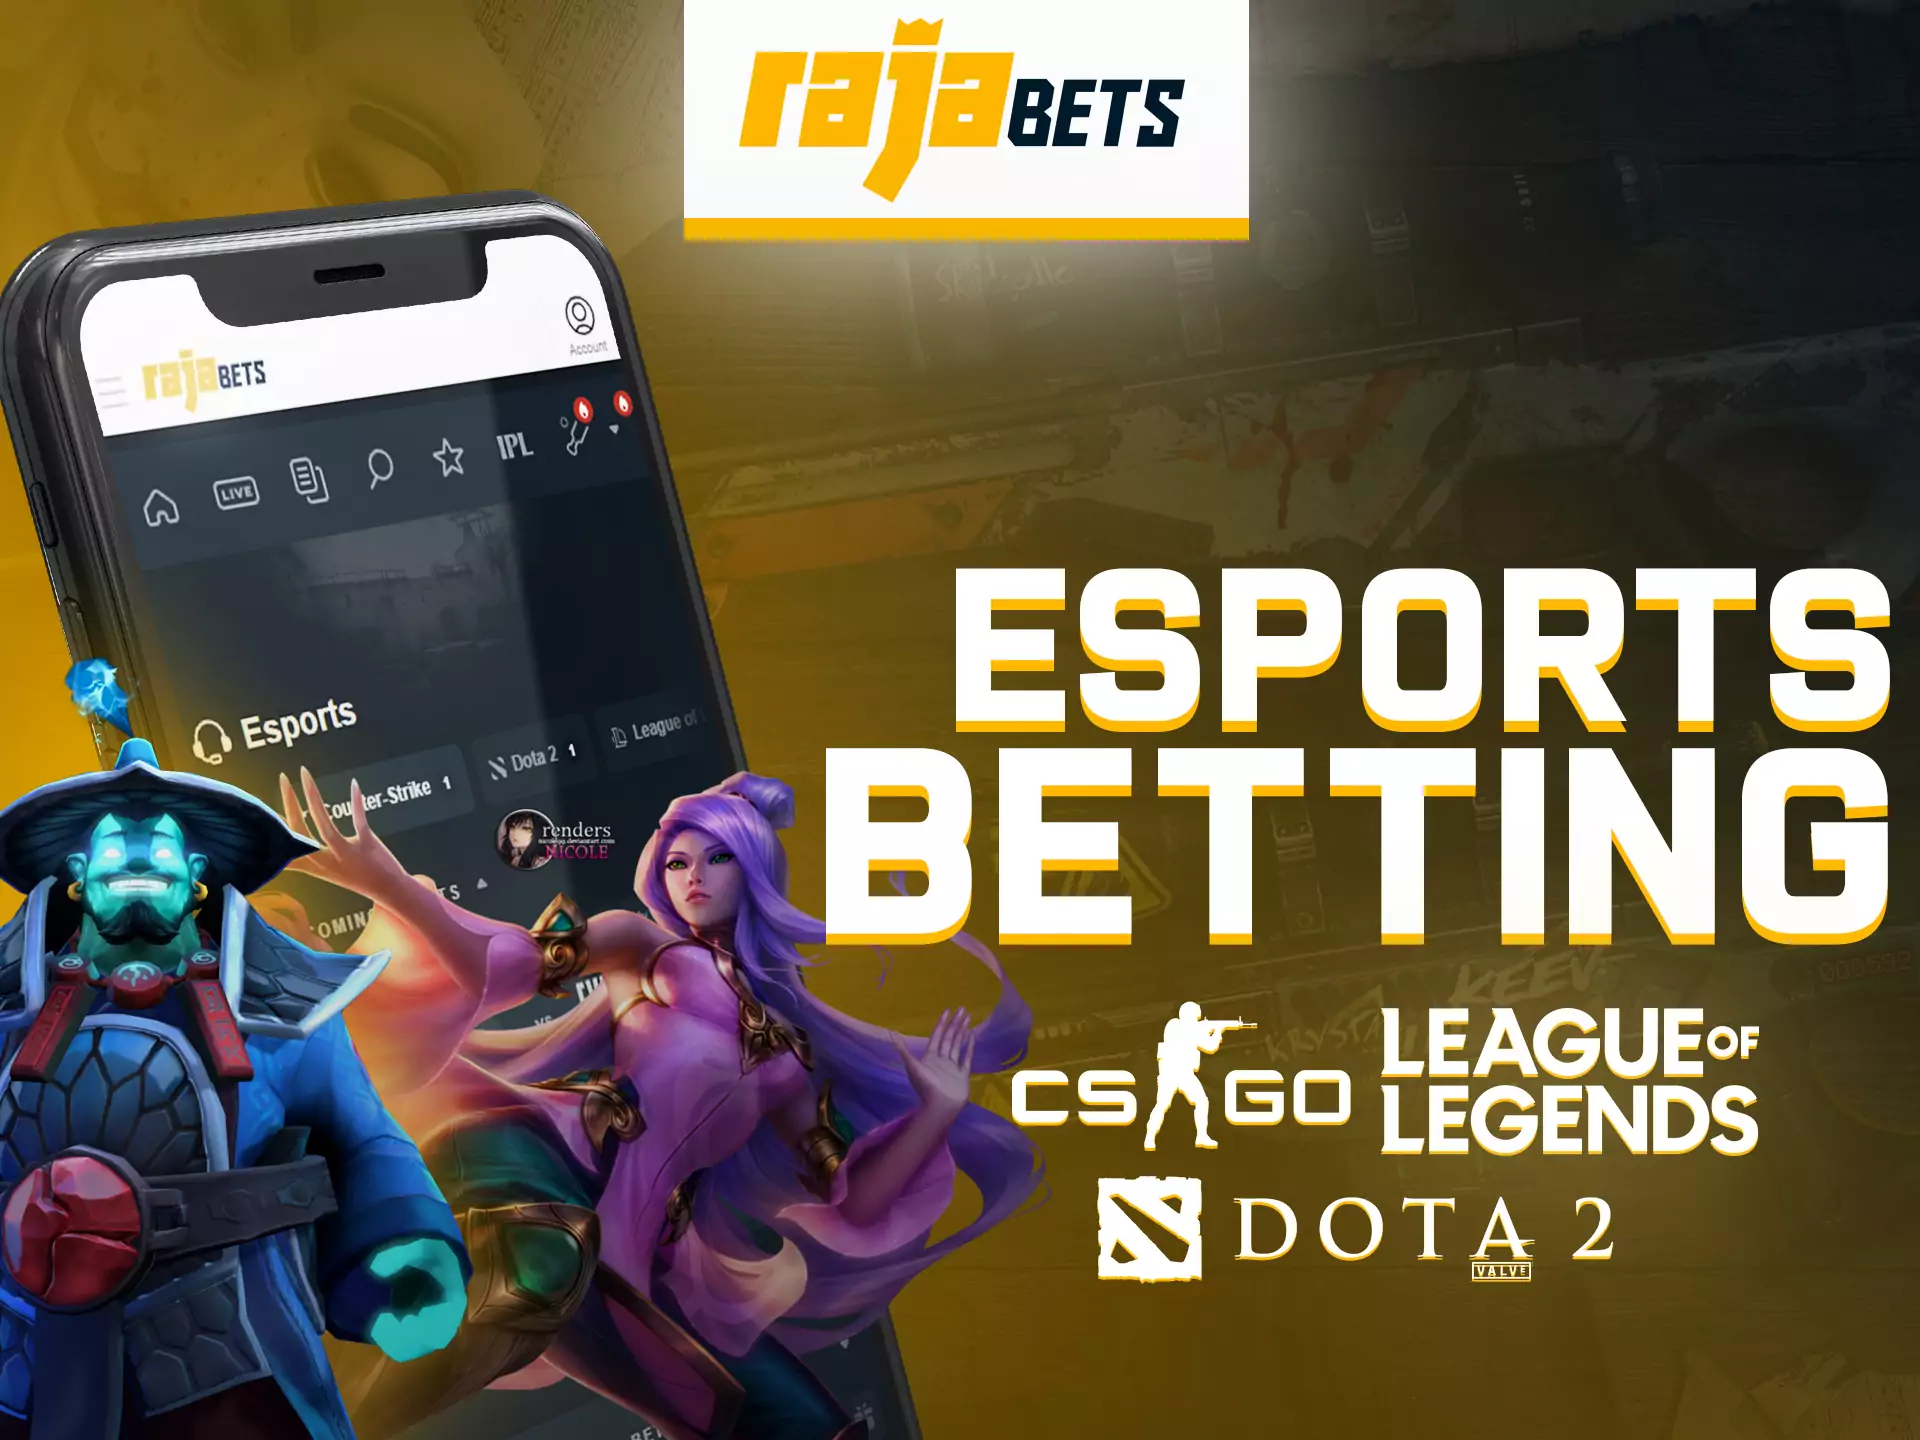 If you're a fan of esports, bet on Rajabets app.